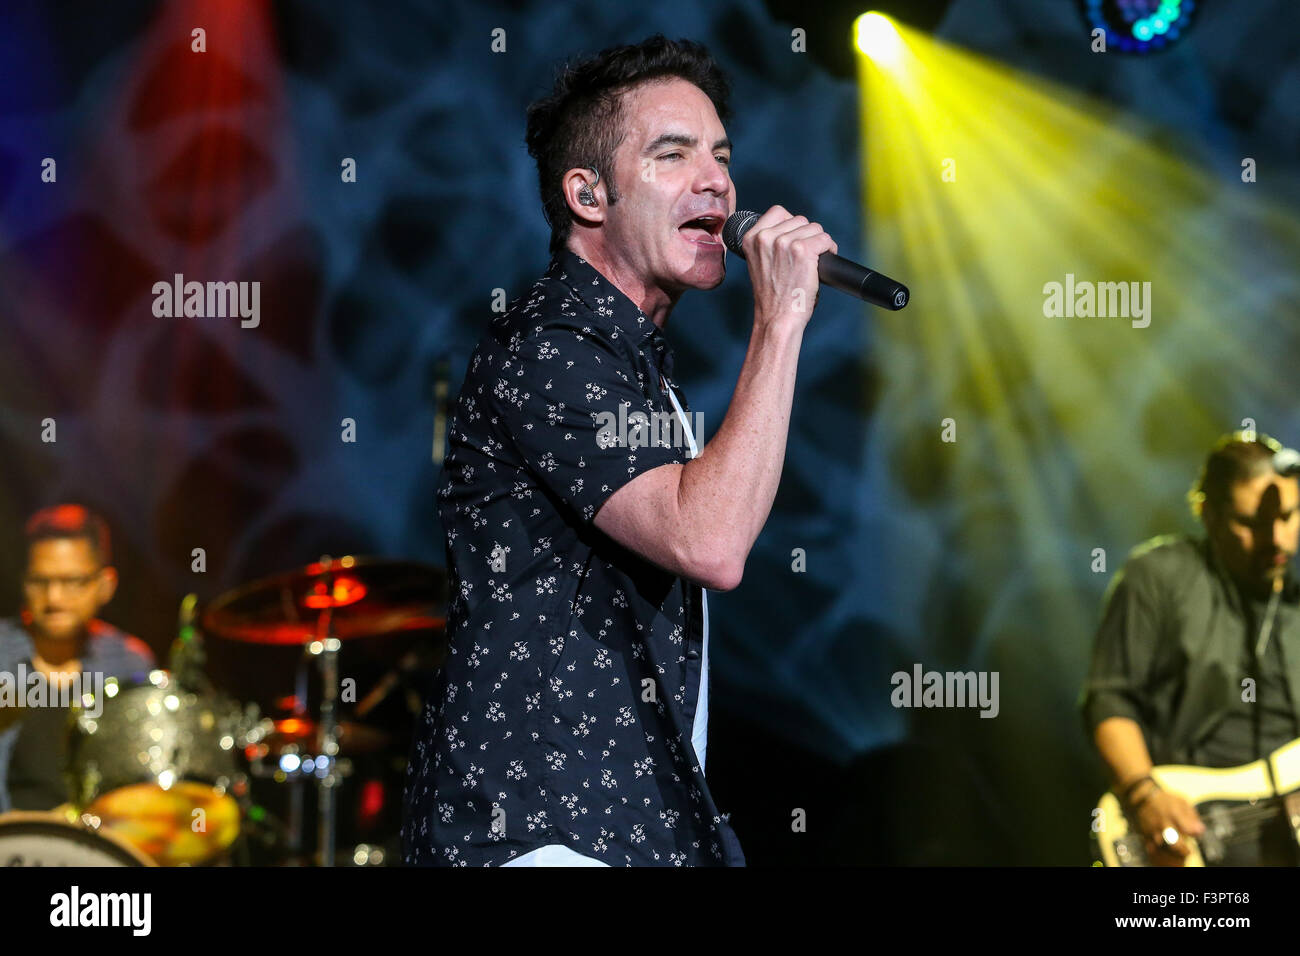 Train performs in North Carolina.   Train is an American rock band from San Francisco, formed in 1993. The band currently consists of Pat Monahan (vocals), Jimmy Stafford (lead guitar), Jerry Becker (rhythm guitar and piano), Hector Maldonado (bass), Drew Shoals (drums), Nikita Houston (backing vocals) and Sakai Smith (backing vocals). Stock Photo